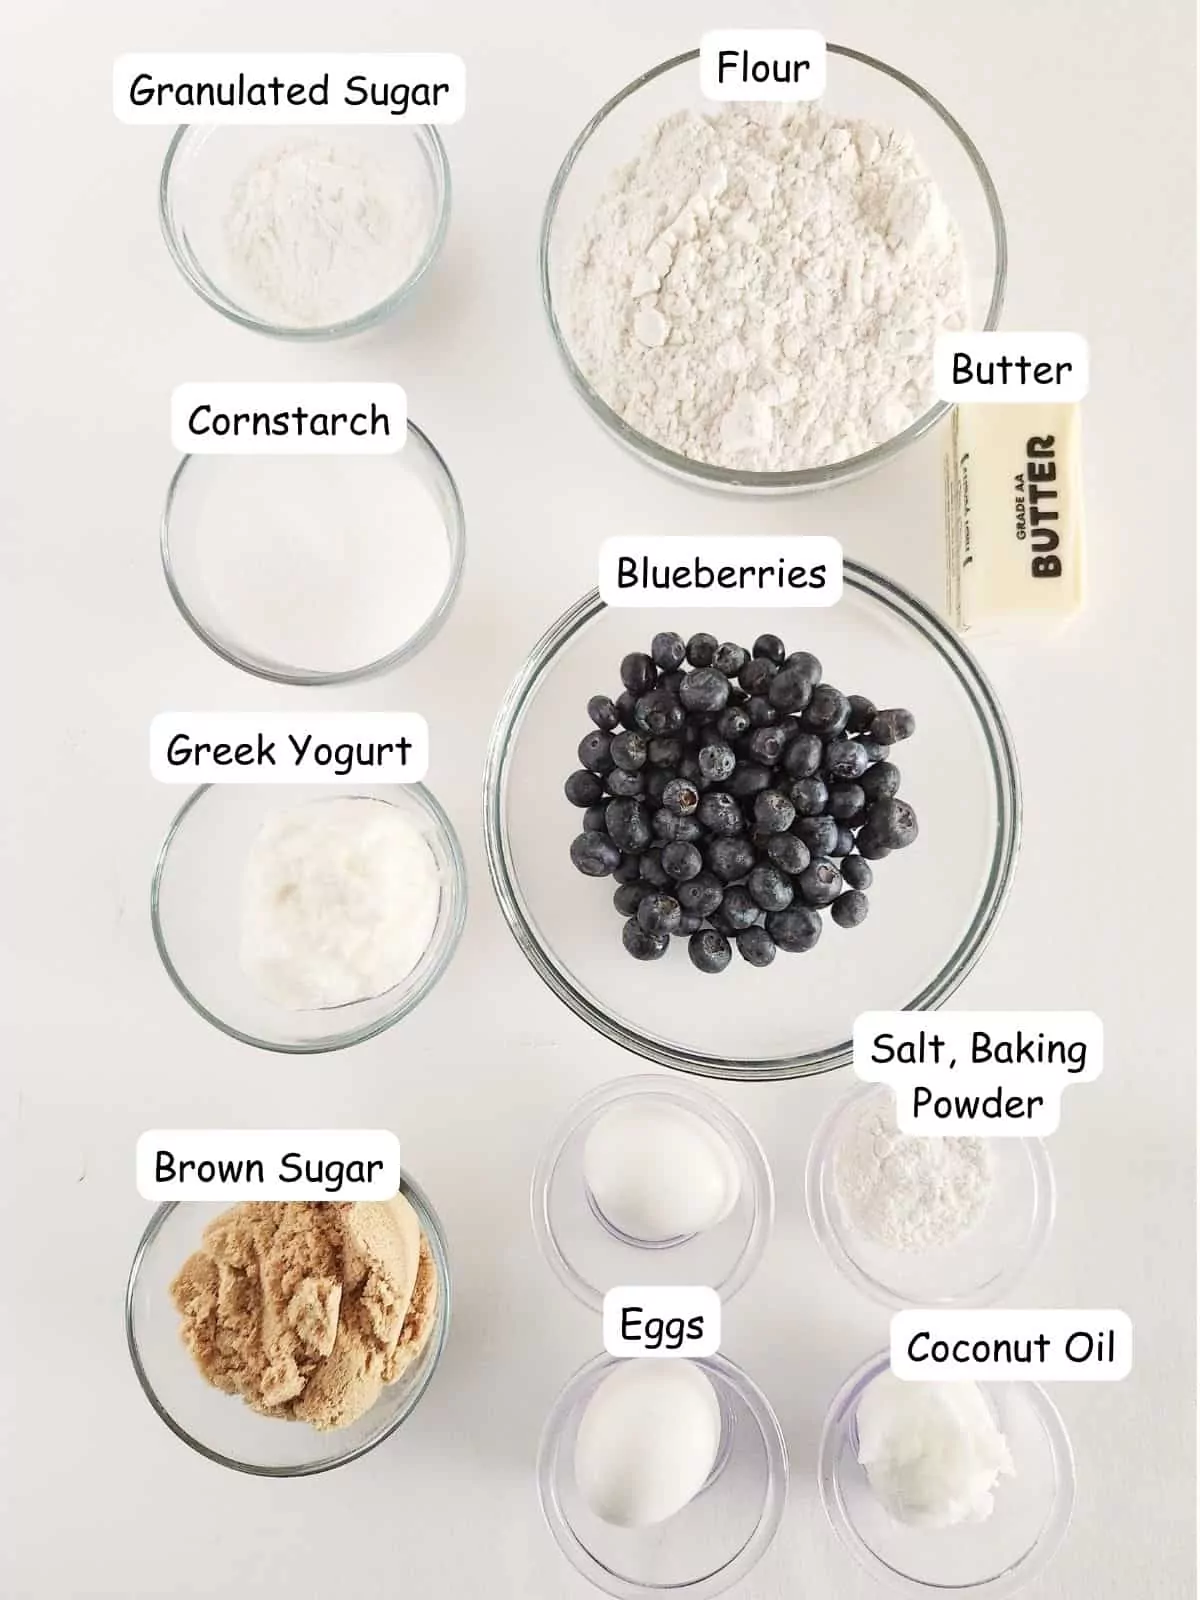 Ingredients for homemade cupcakes with Greek yogurt and coconut oil.